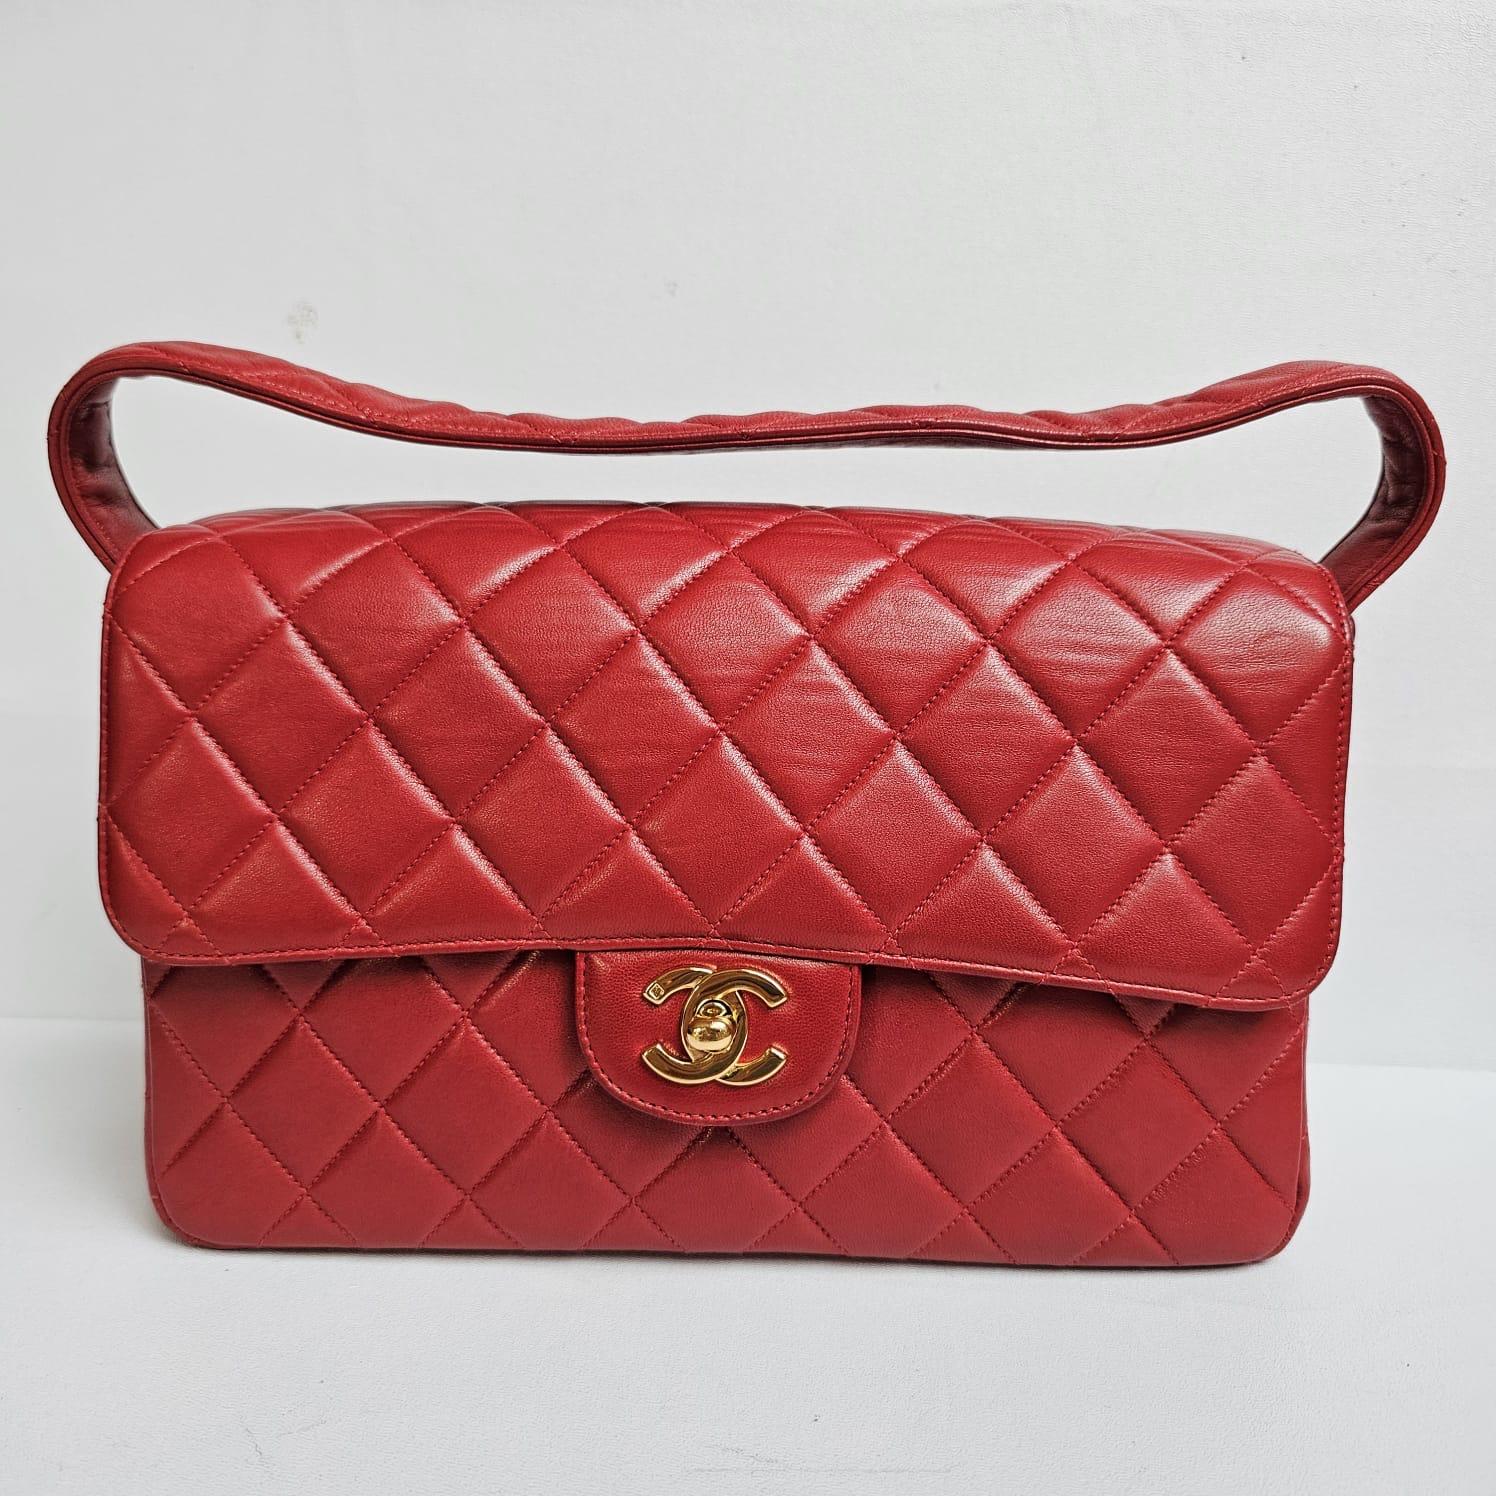 Chanel Vintage Red Lambskin Medium Quilted Double Face Top Handle Bag For Sale 13